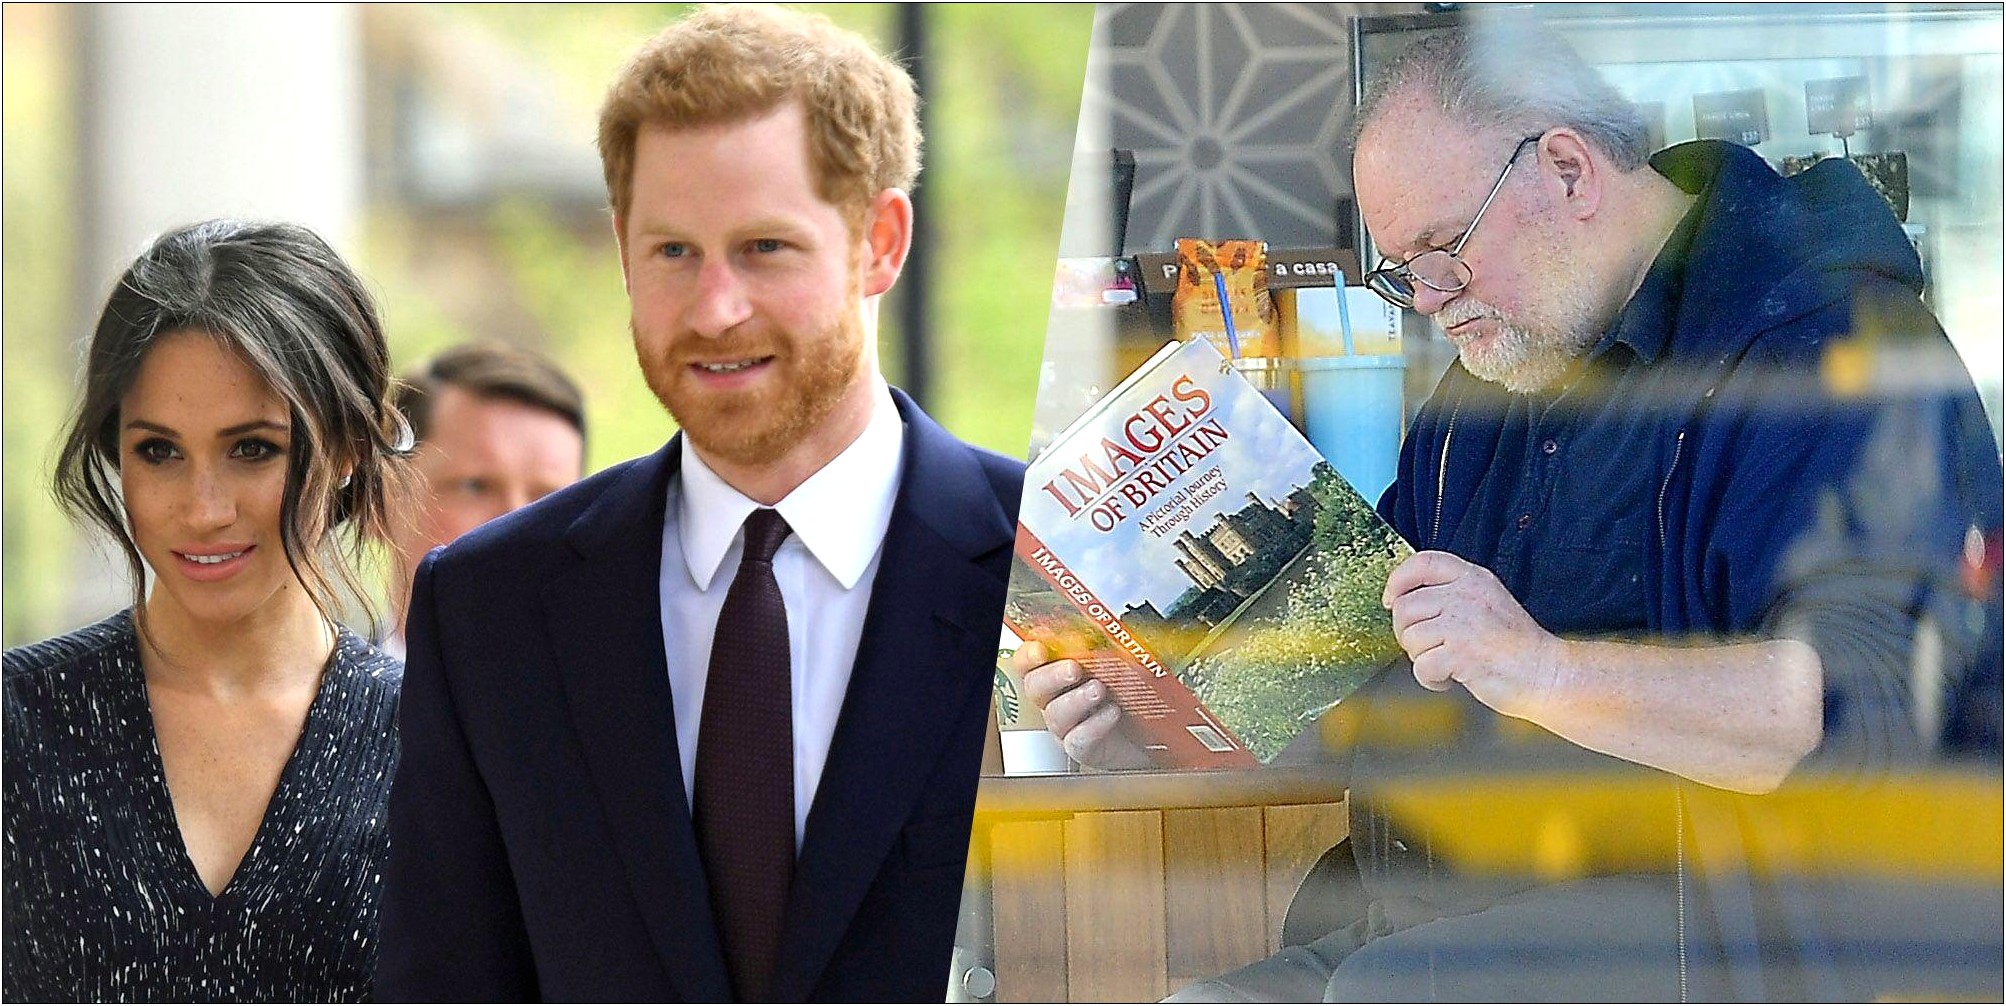 Is Meghan Markle's Dad Invited To Wedding